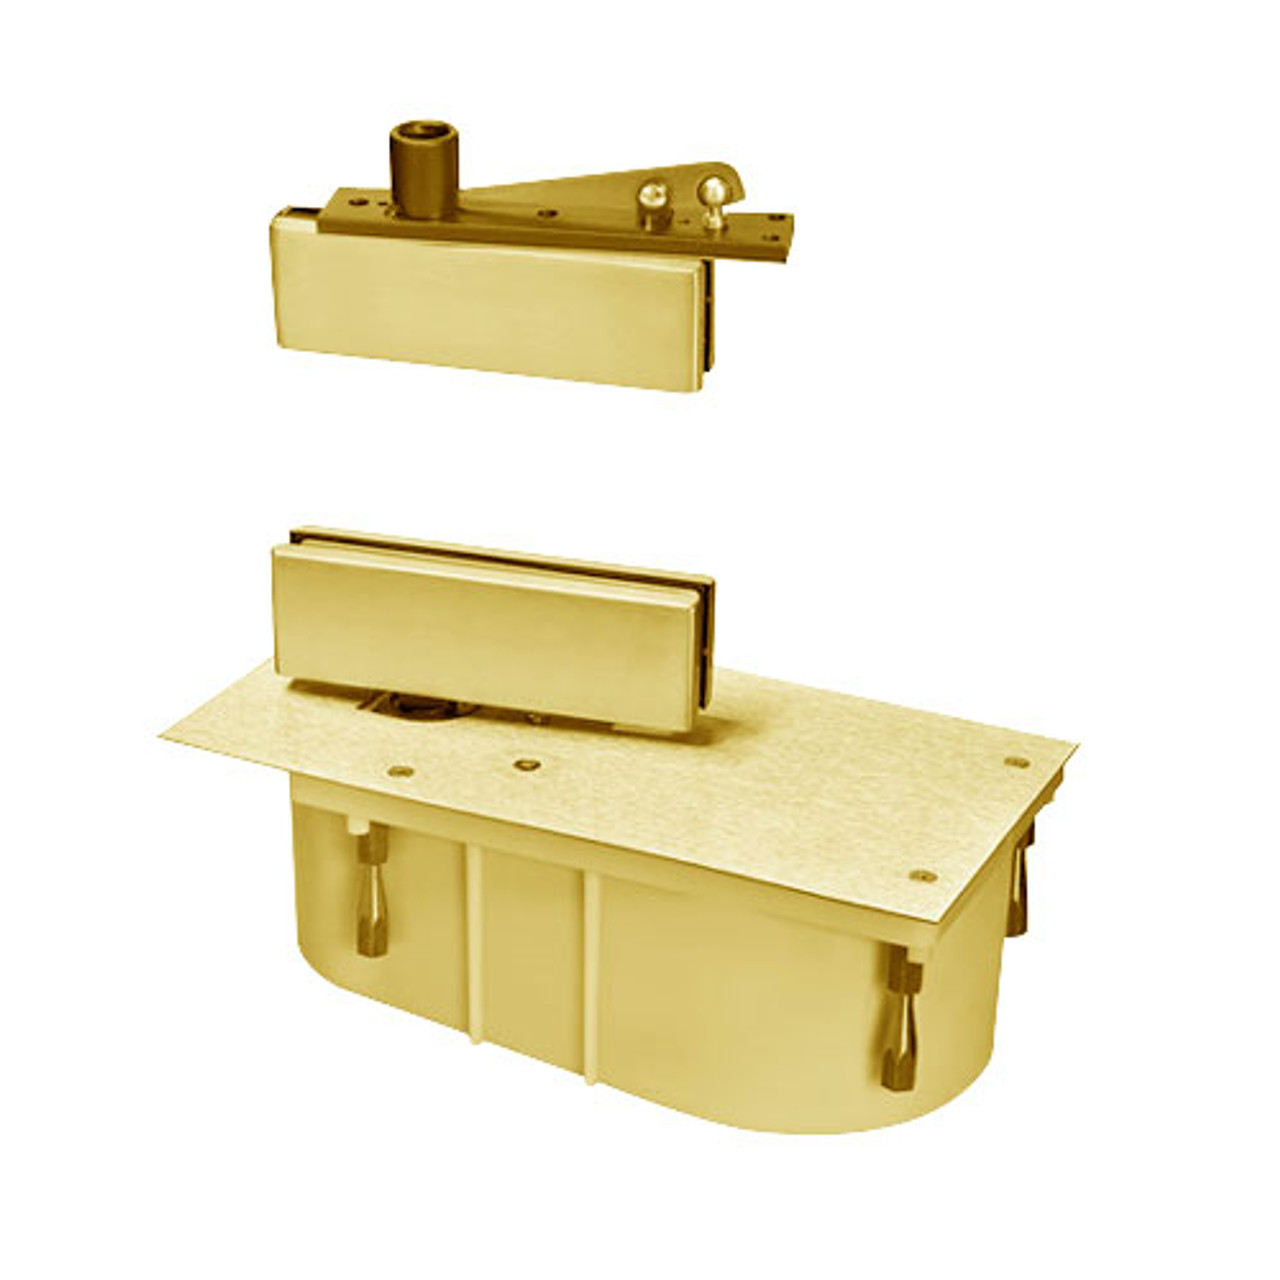 428-85S-LFP-RH-605 Rixson 428 Series Heavy Duty Single Acting Center Hung Floor Closer with Patch Fittings in Bright Brass Finish